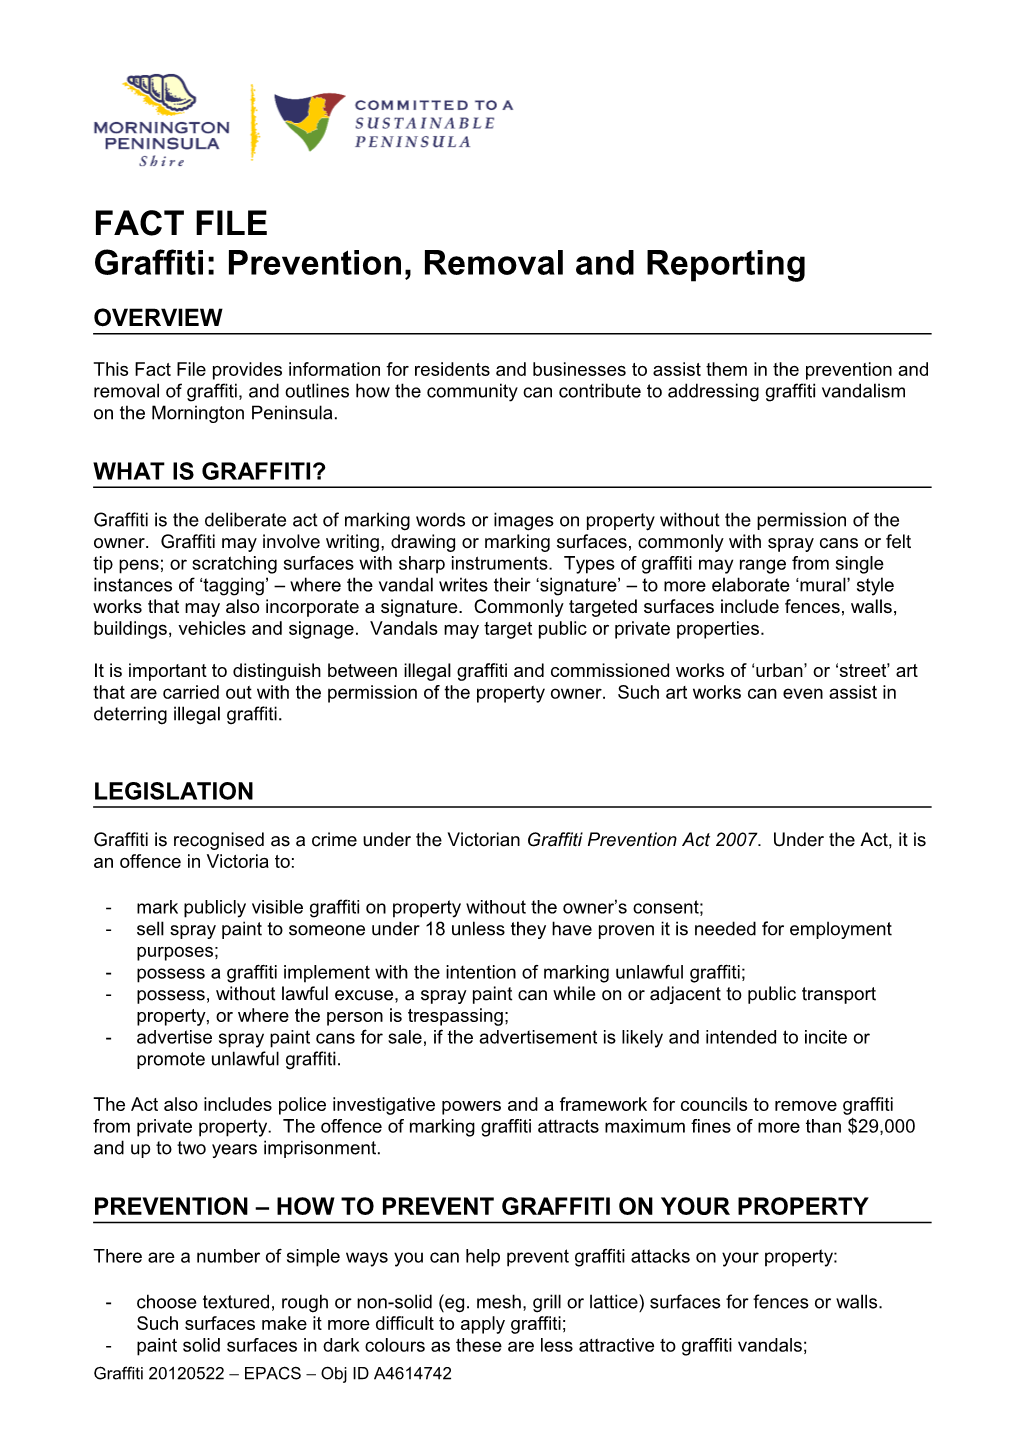 Graffiti: Prevention, Removal and Reporting